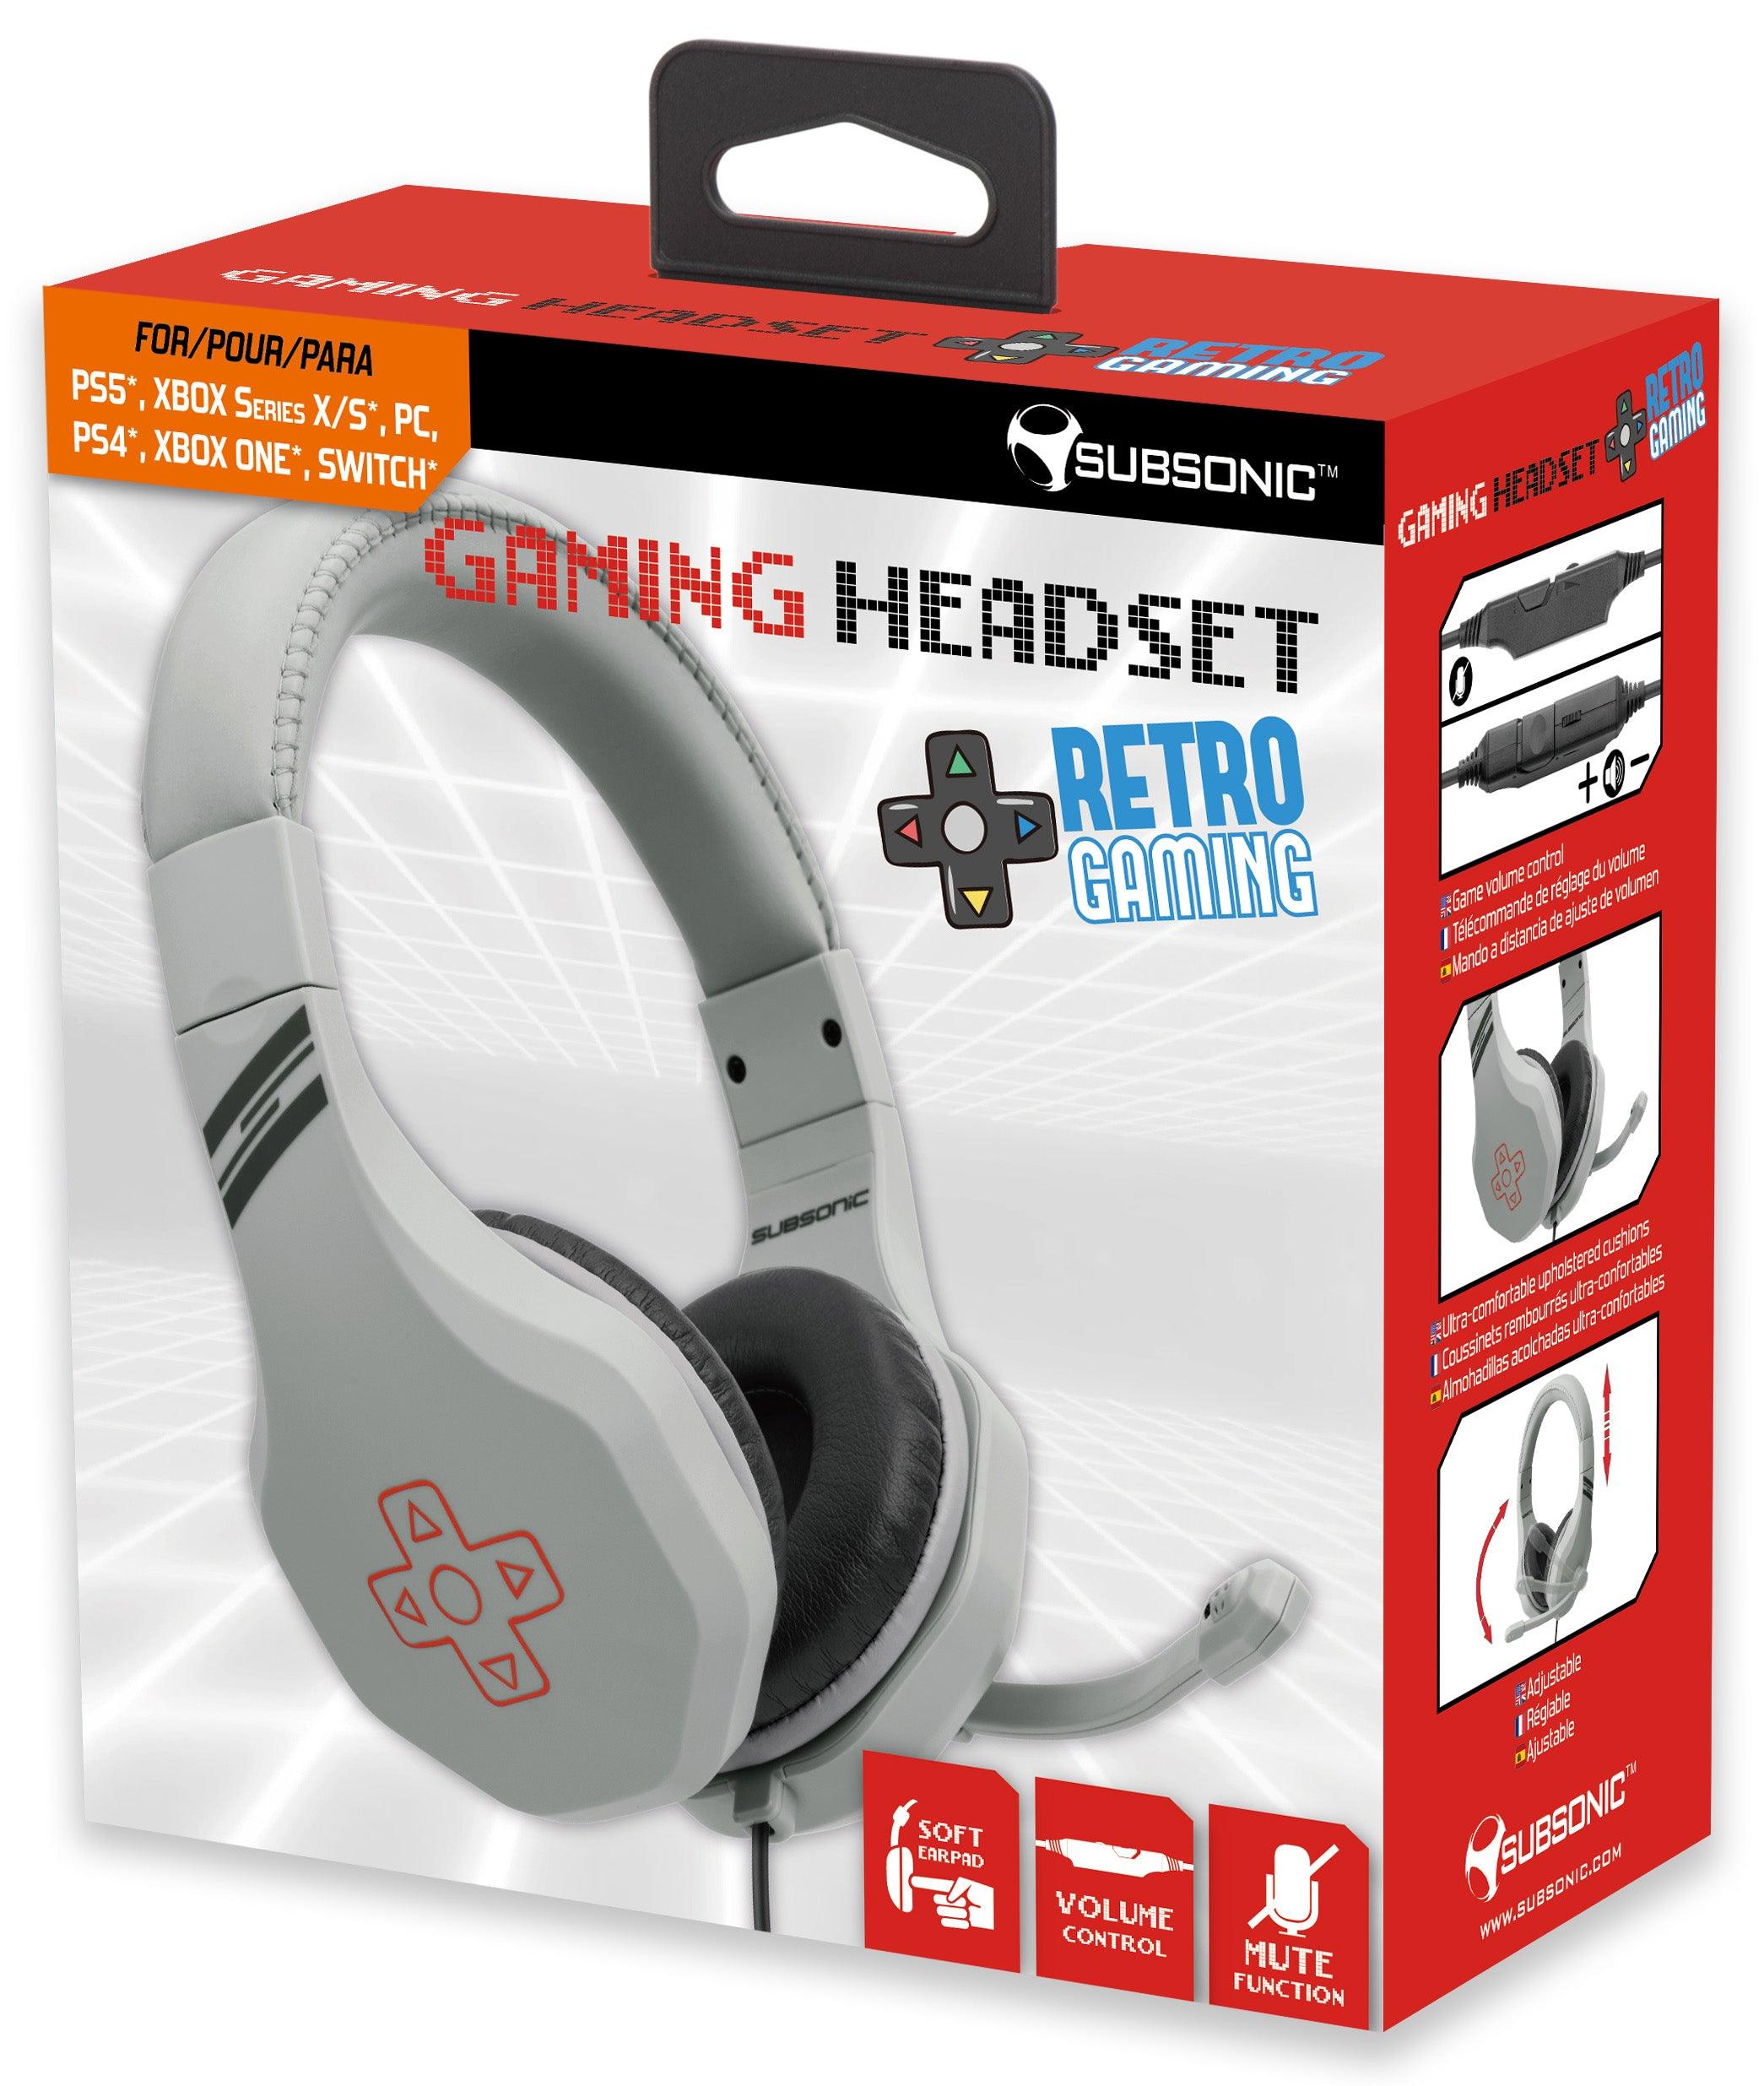 Retro Style Gaming Headset - Want a New Gadget